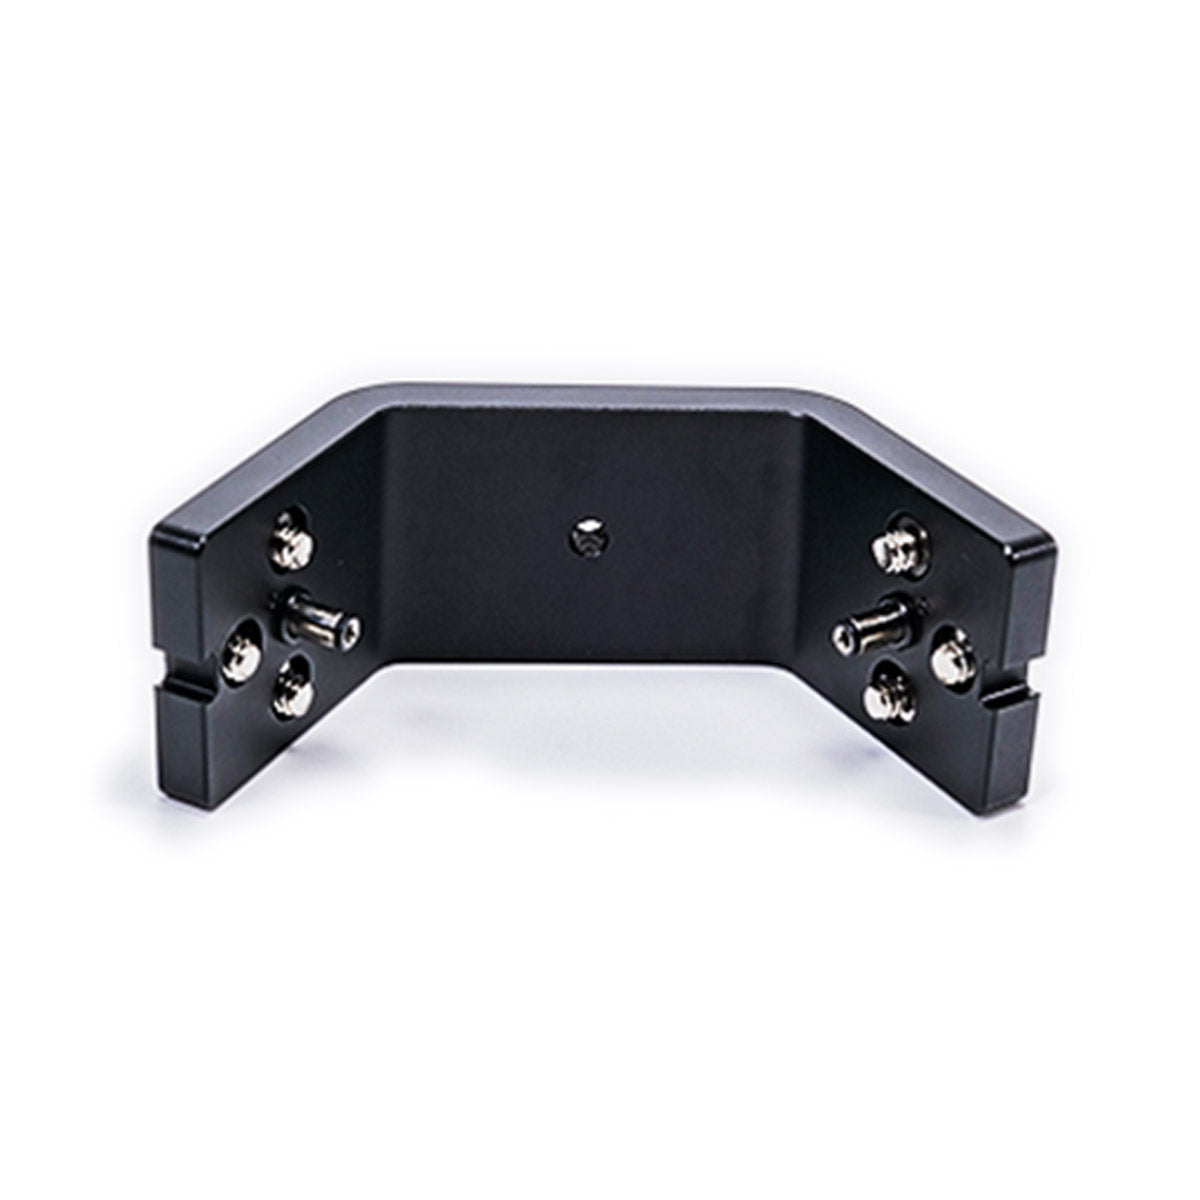 Aputure Triangle 3D Connectors for INFINIBAR LED Light Bars